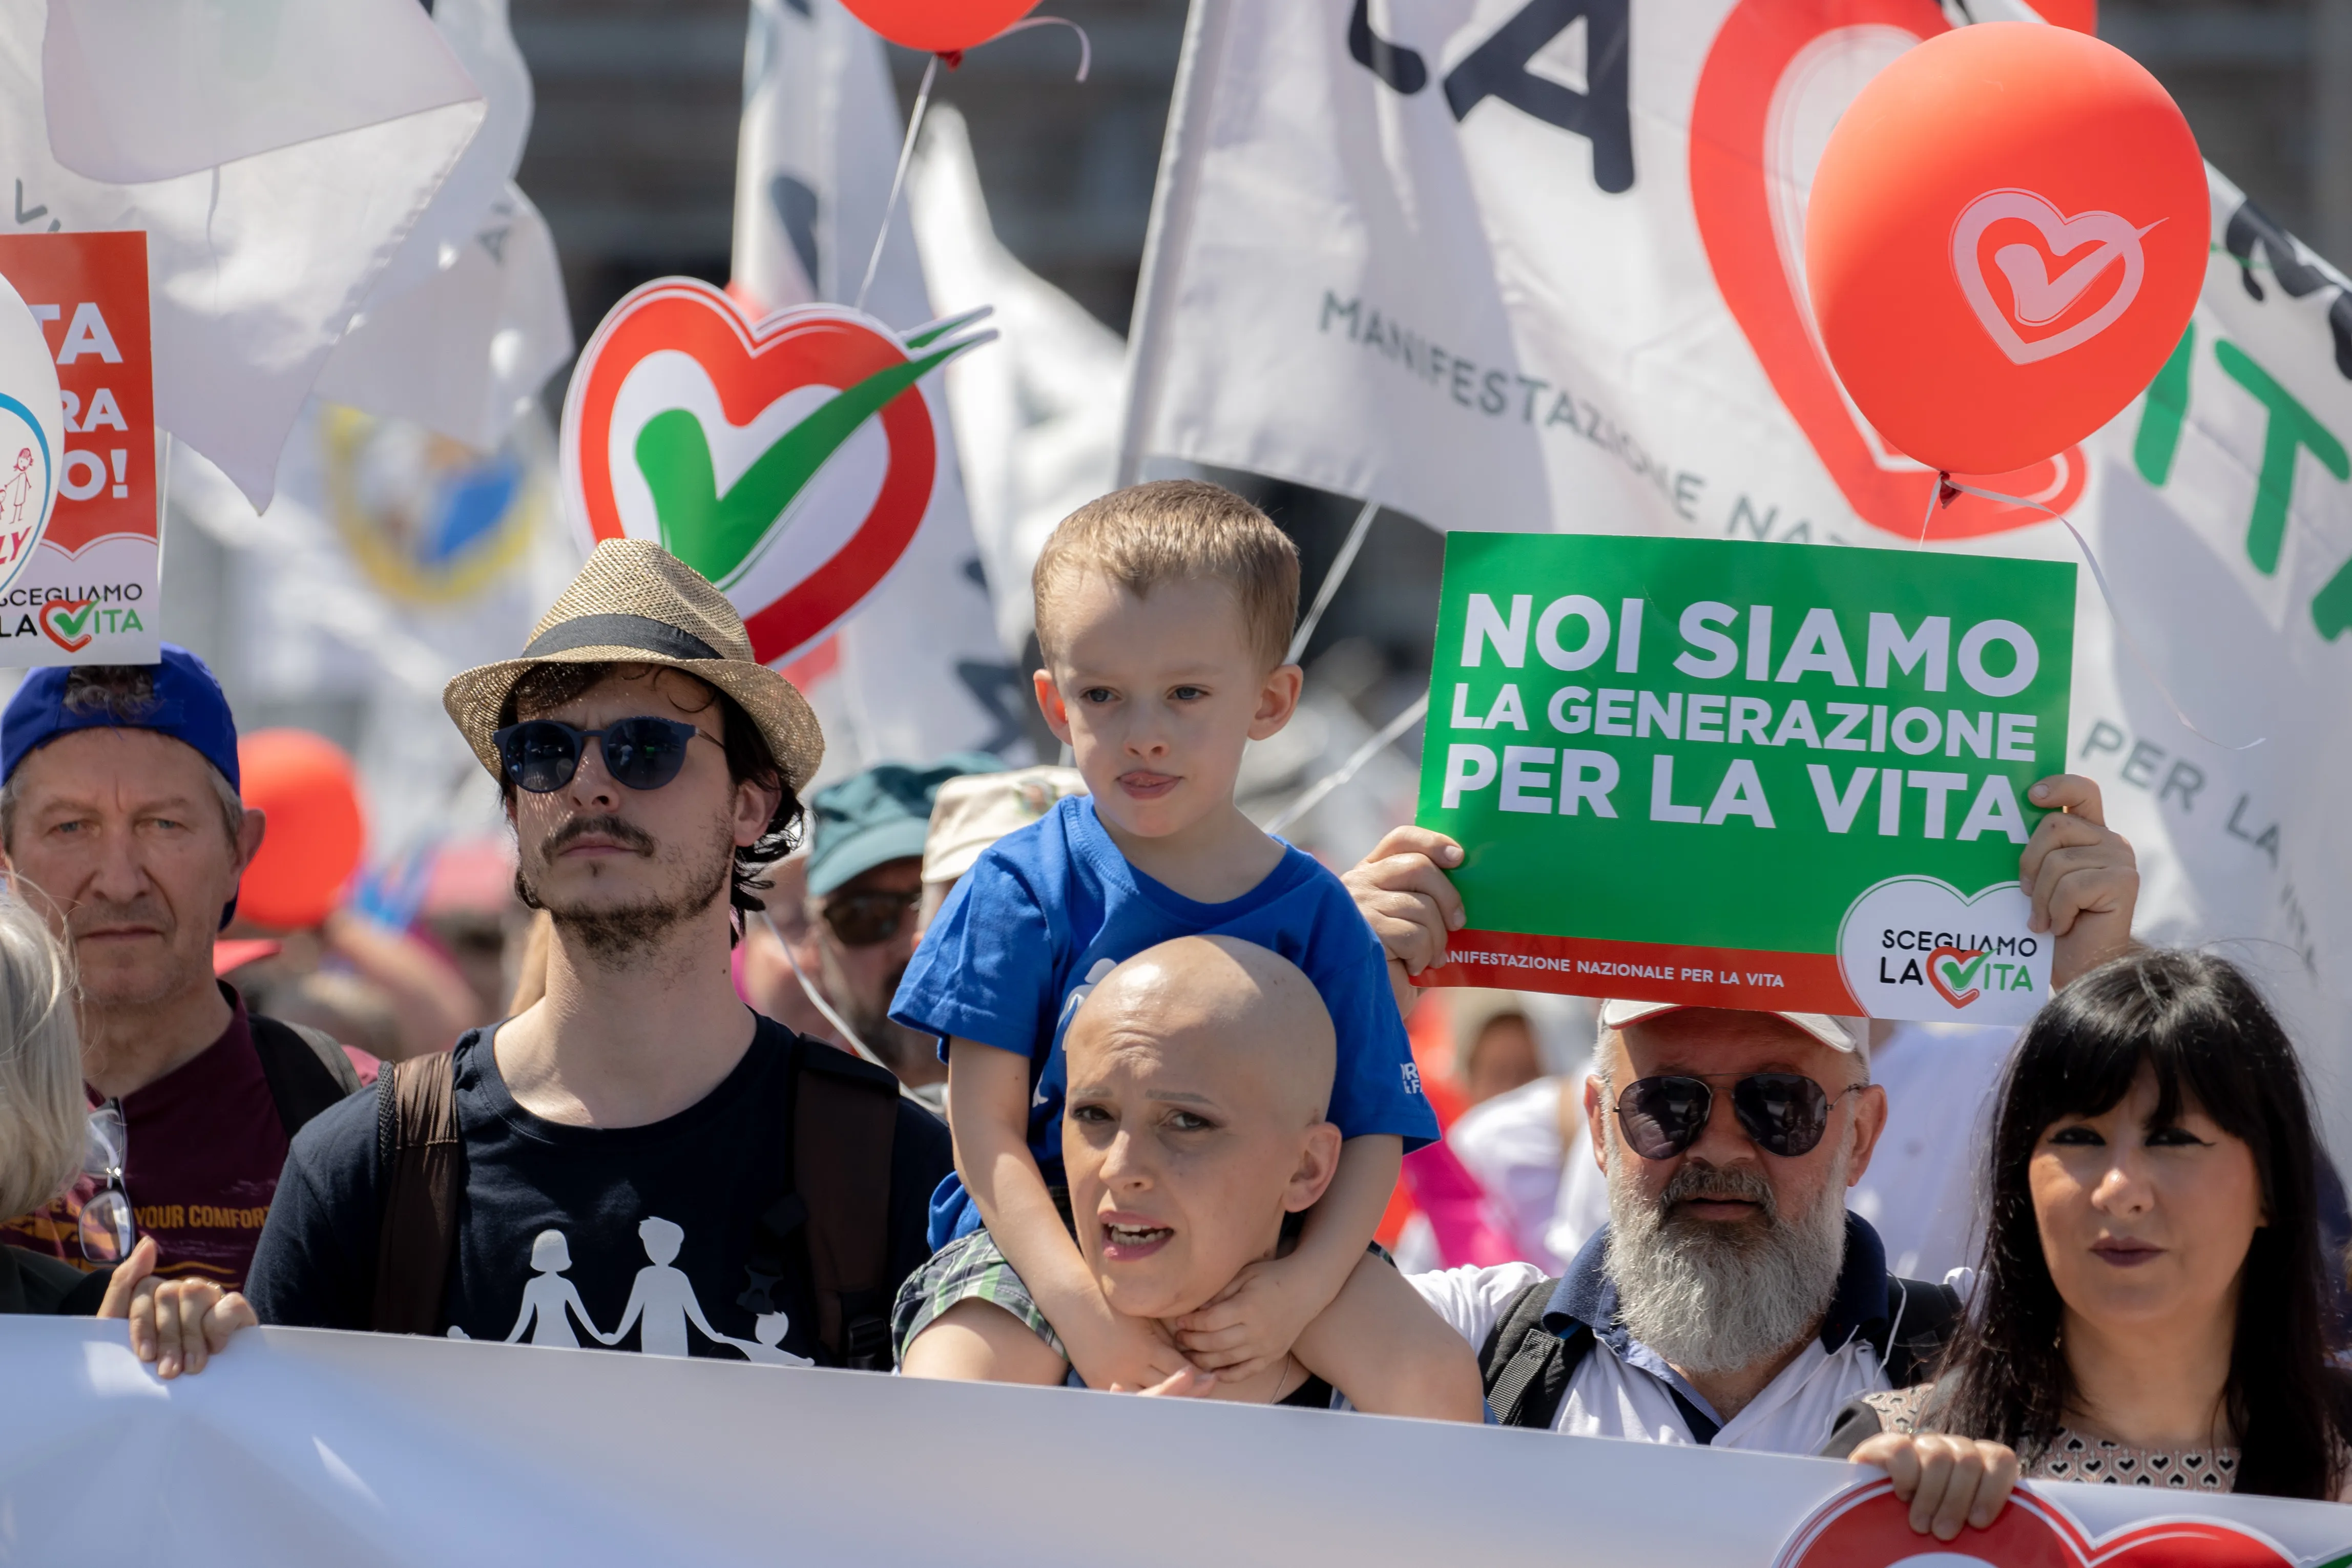 Participants in Italy's pro-life demonstration in Rome on May 21, 2022.?w=200&h=150